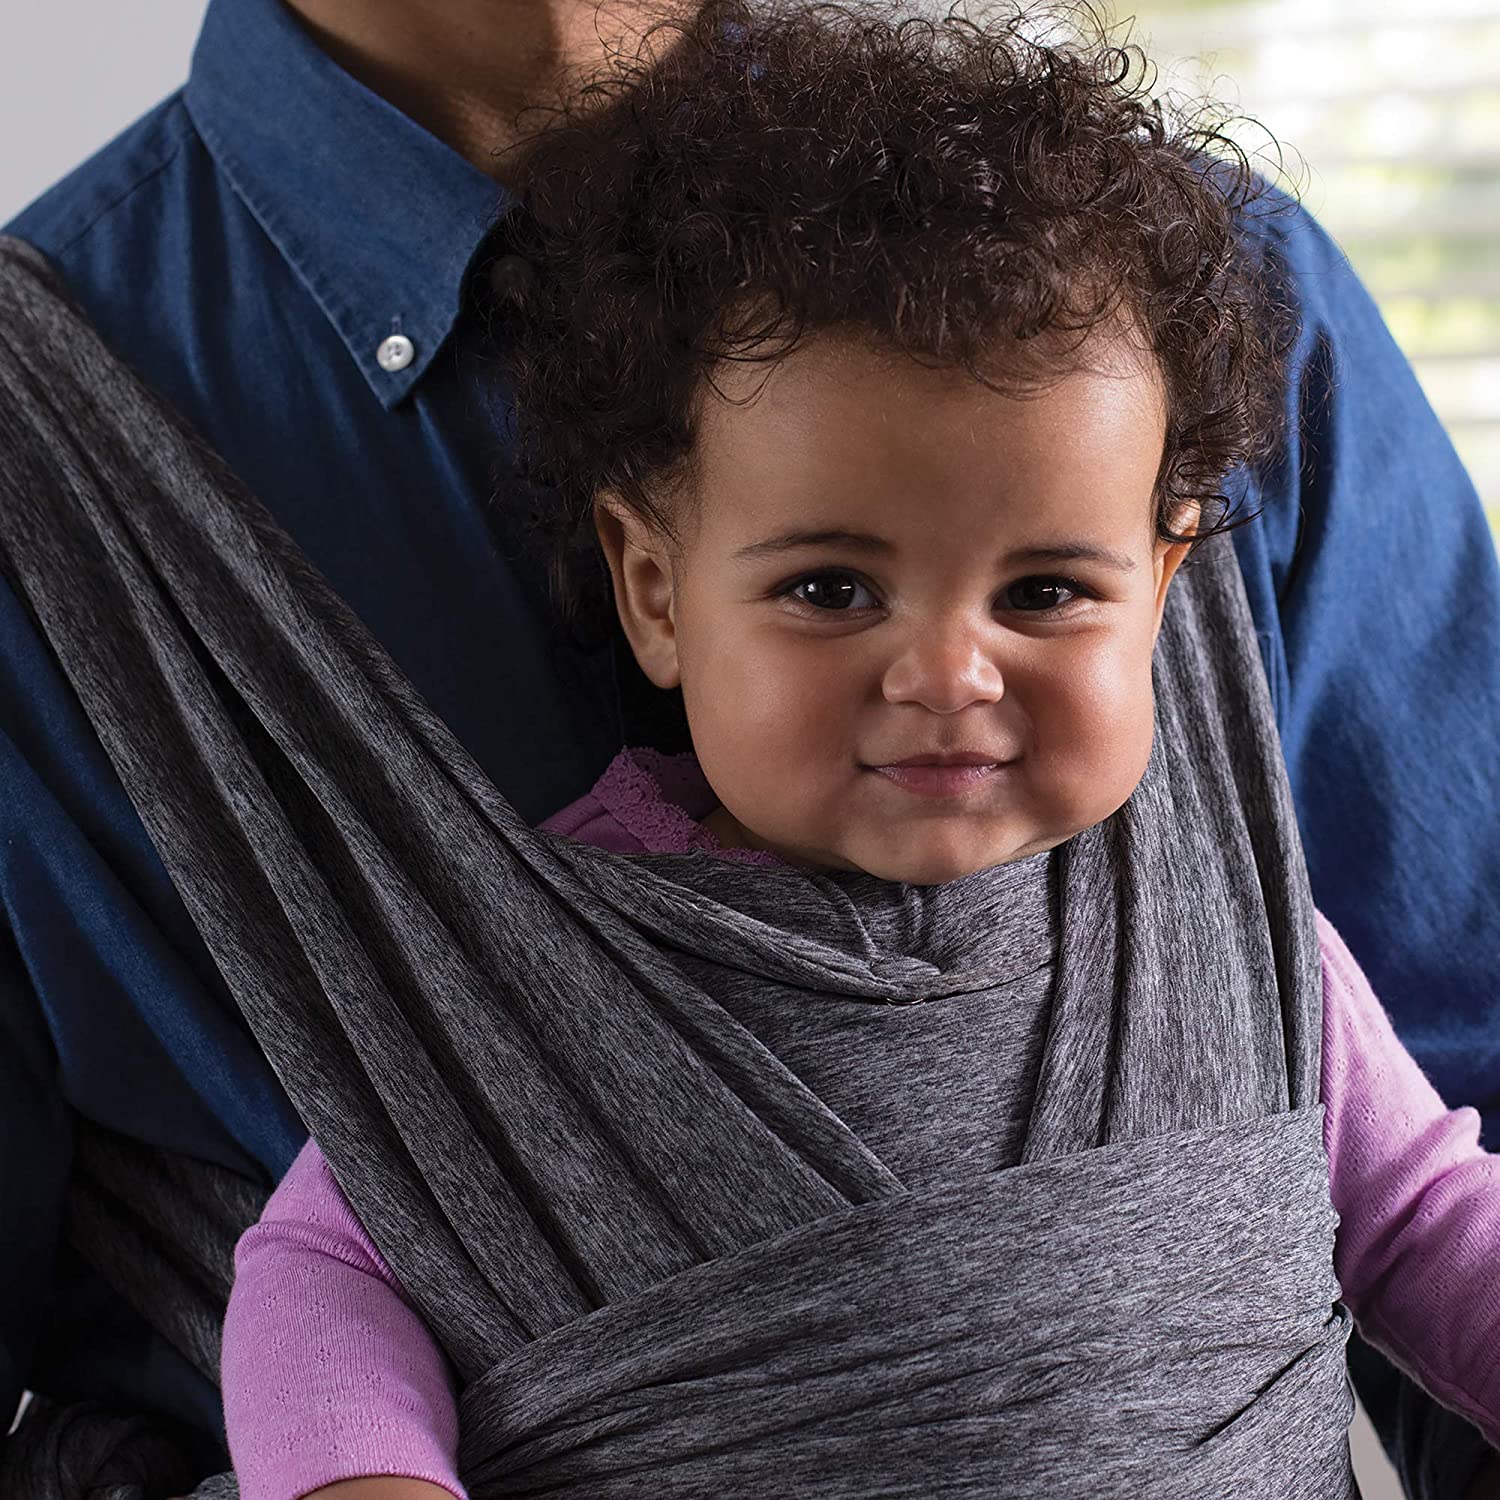 Boppy Comfy Fit Baby Carrier – Just For Babies, Inc.